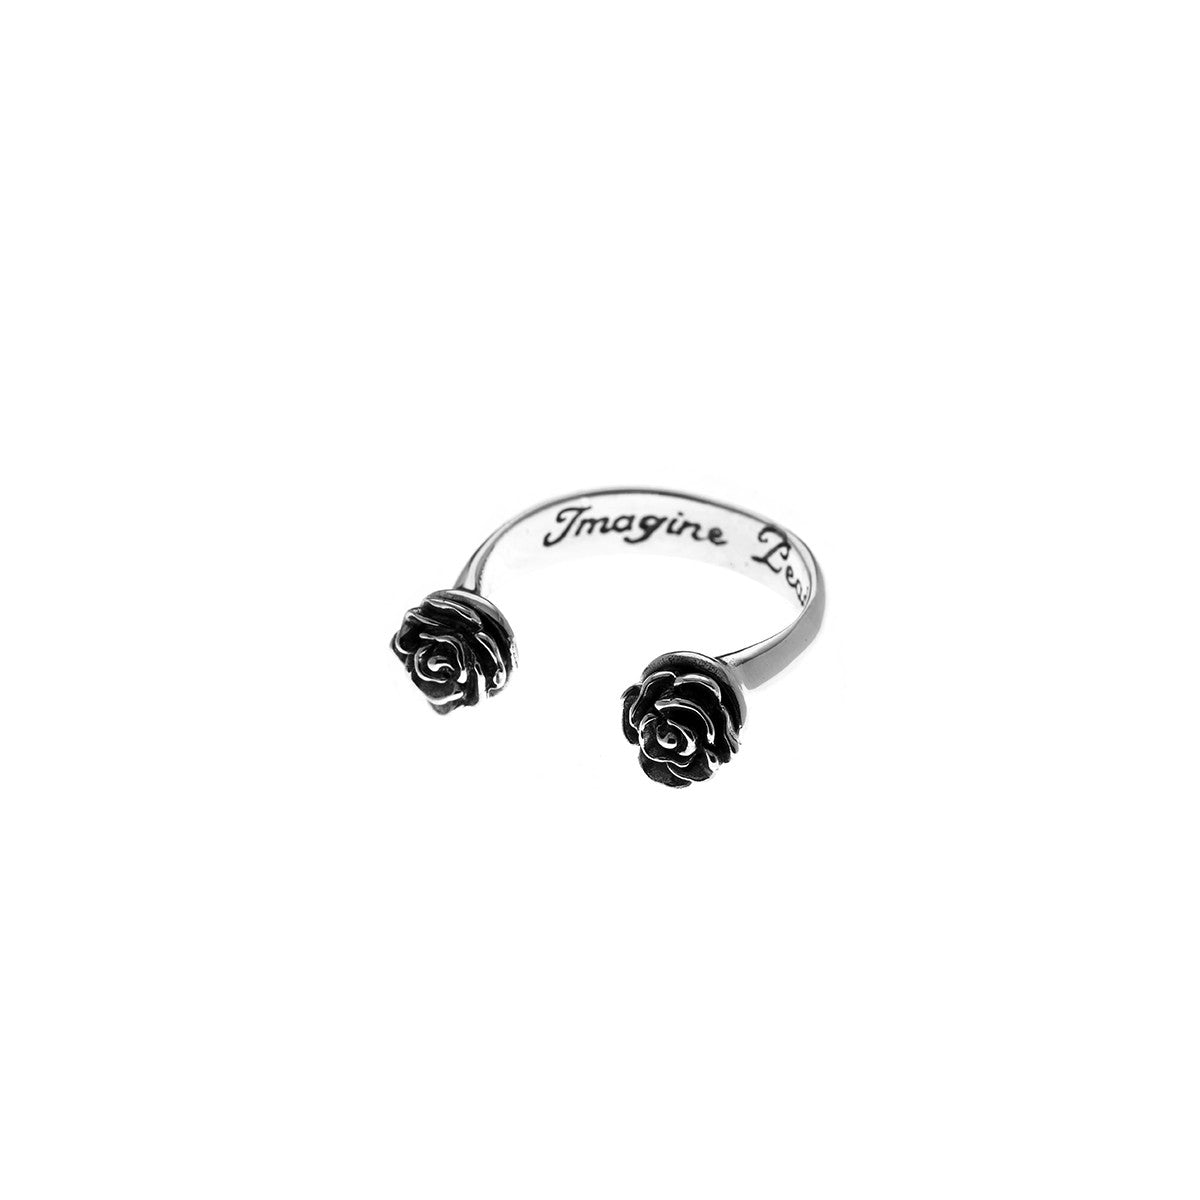 Imagine Peace Rose Etched Sterling Silver Ring - Cynthia Gale New York Jewelry